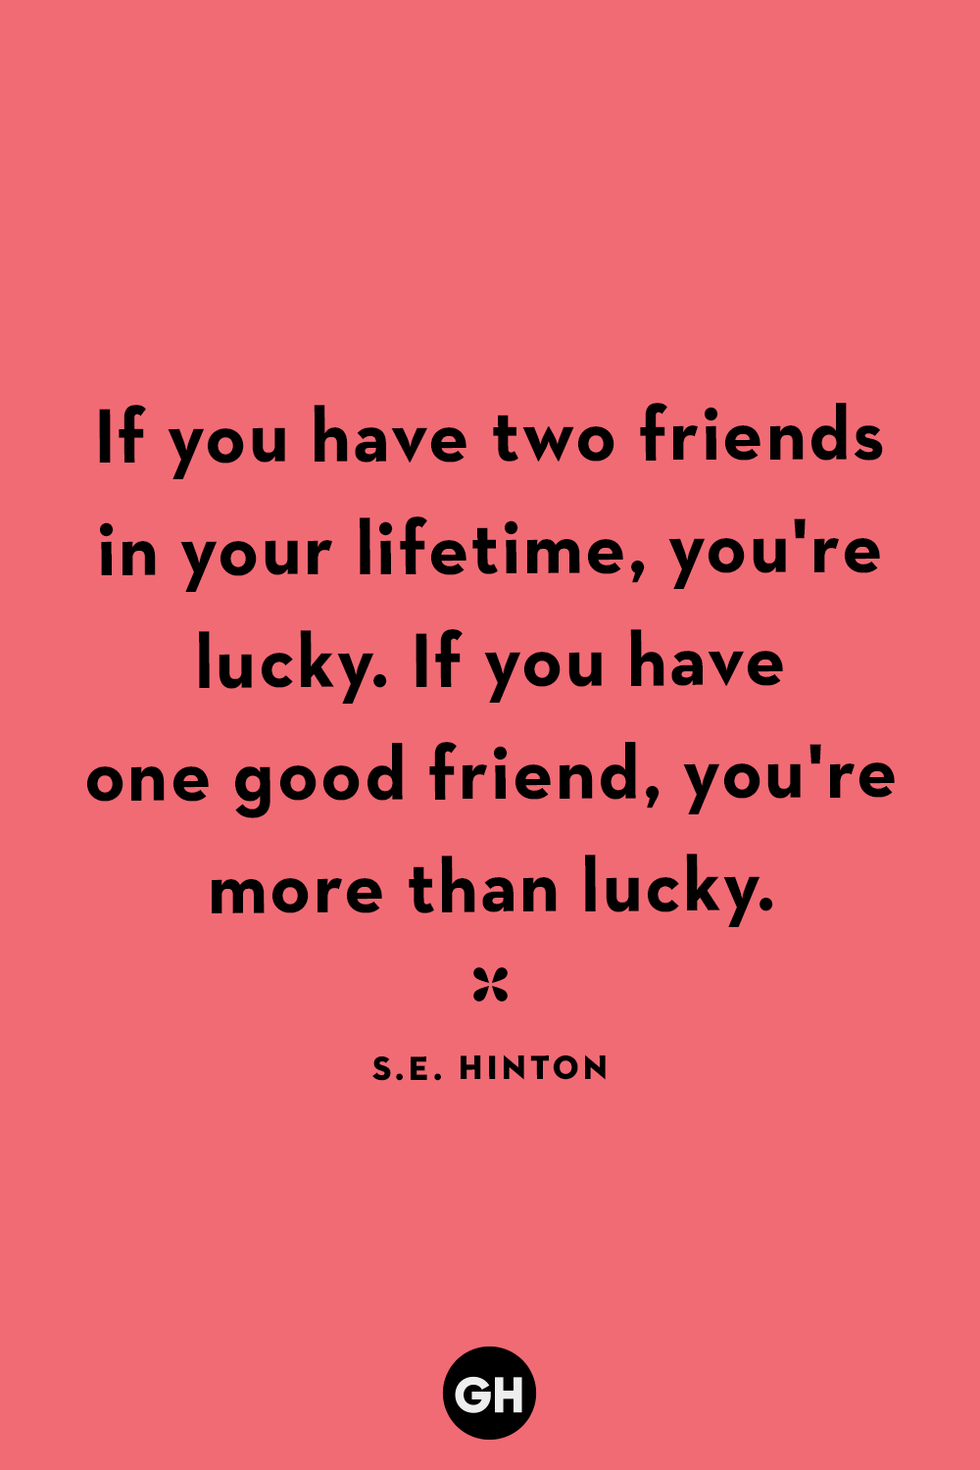 120 Friendship Quotes Your Best Friend Will Love